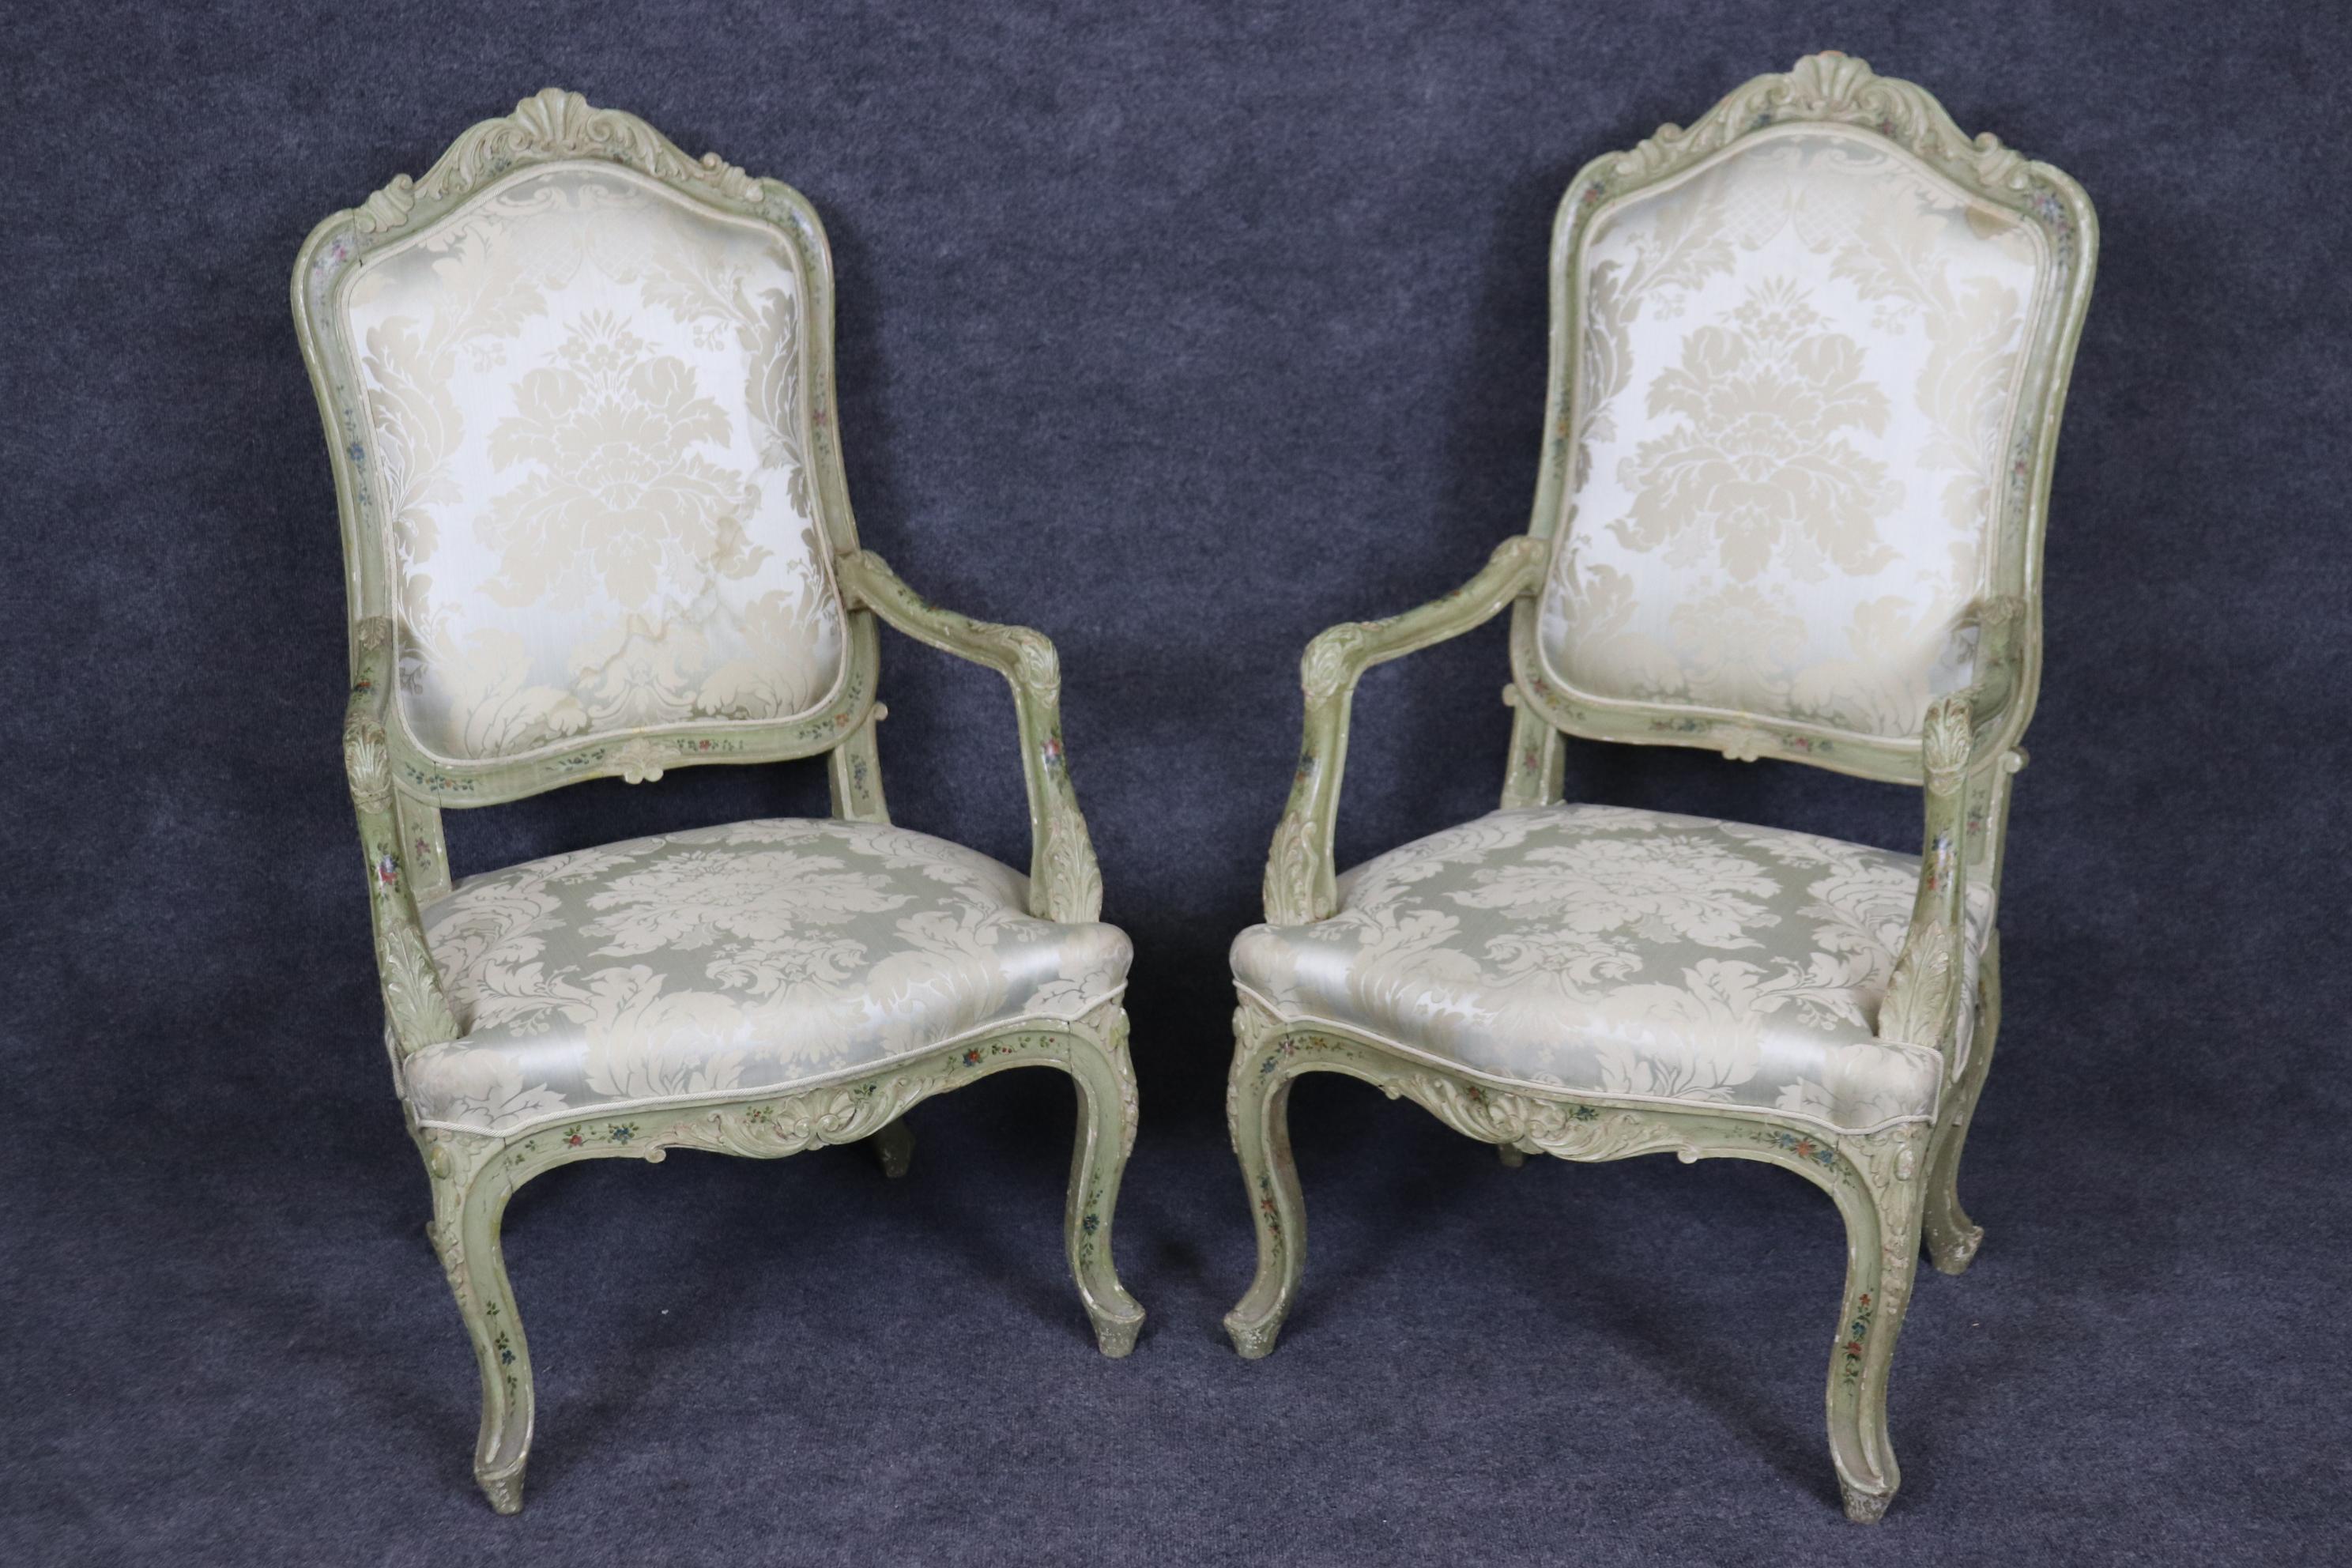 This is a gorgeous set of 8 Venetian paint decorated French Louis XV style chairs. The chairs were made in Italy in the French taste. The chairs have damages to their original upholstery and will need reupholstery however the frames are gorgeous and